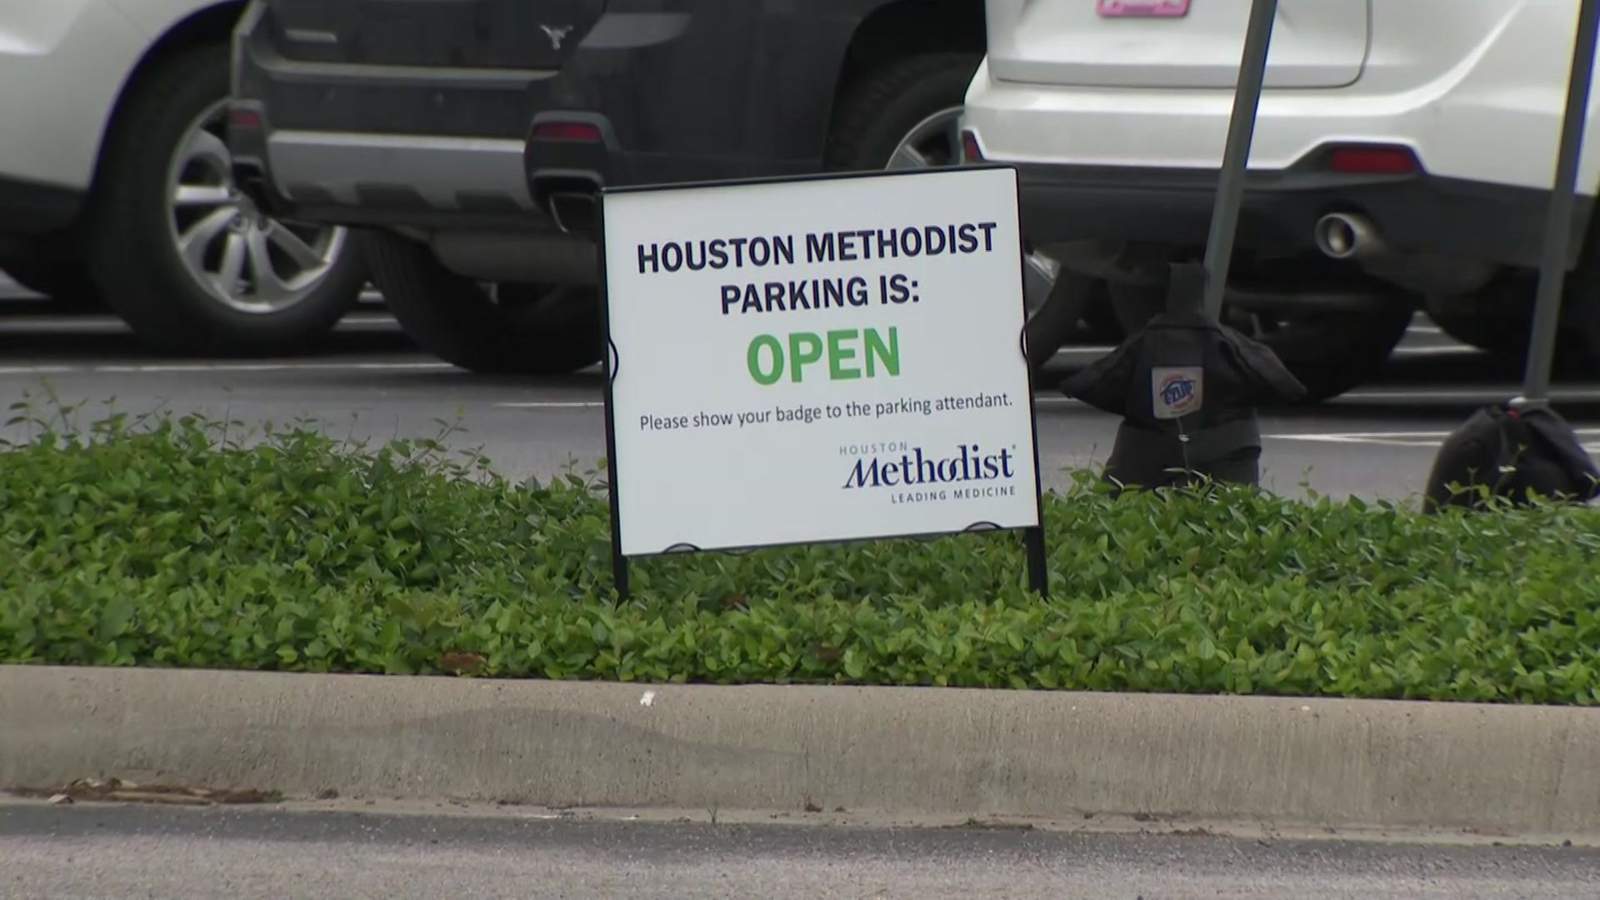 ‘We’re trying to reduce rates:’ Texas Medical Center responds to workers’ concerns about parking fees